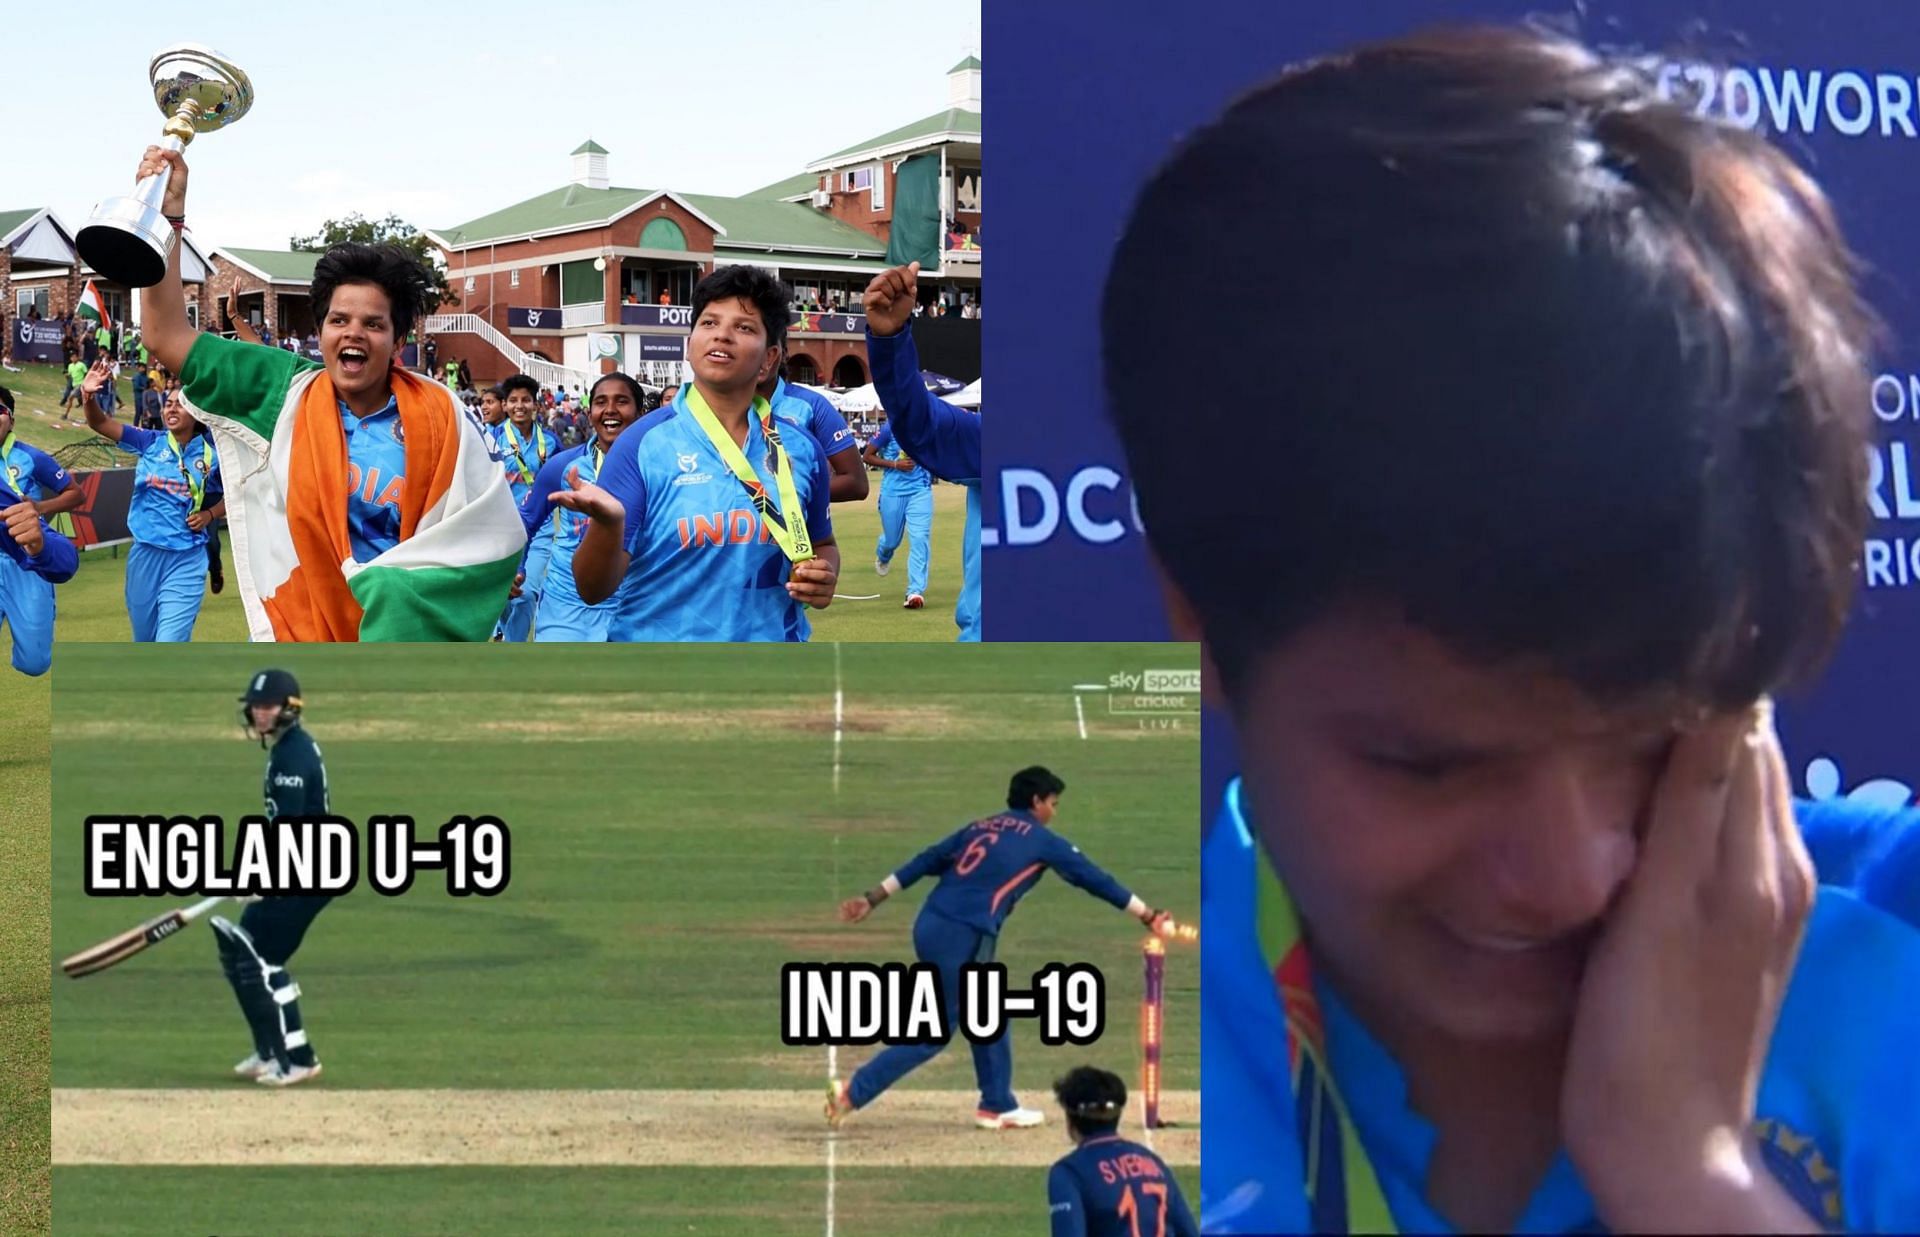 Fans react after India win on Sunday.